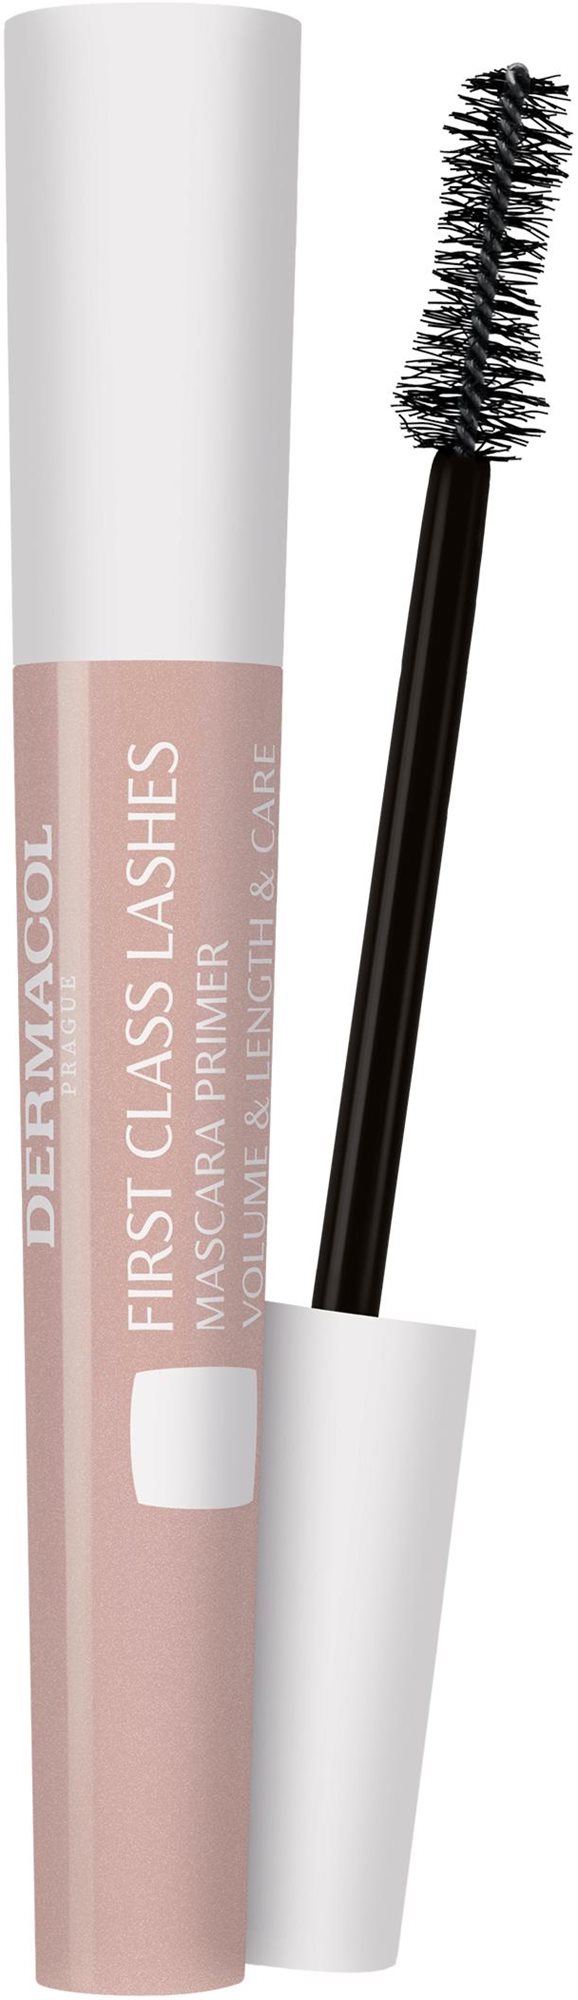 DERMACOL First class lashes mascara primer 7,5 ml